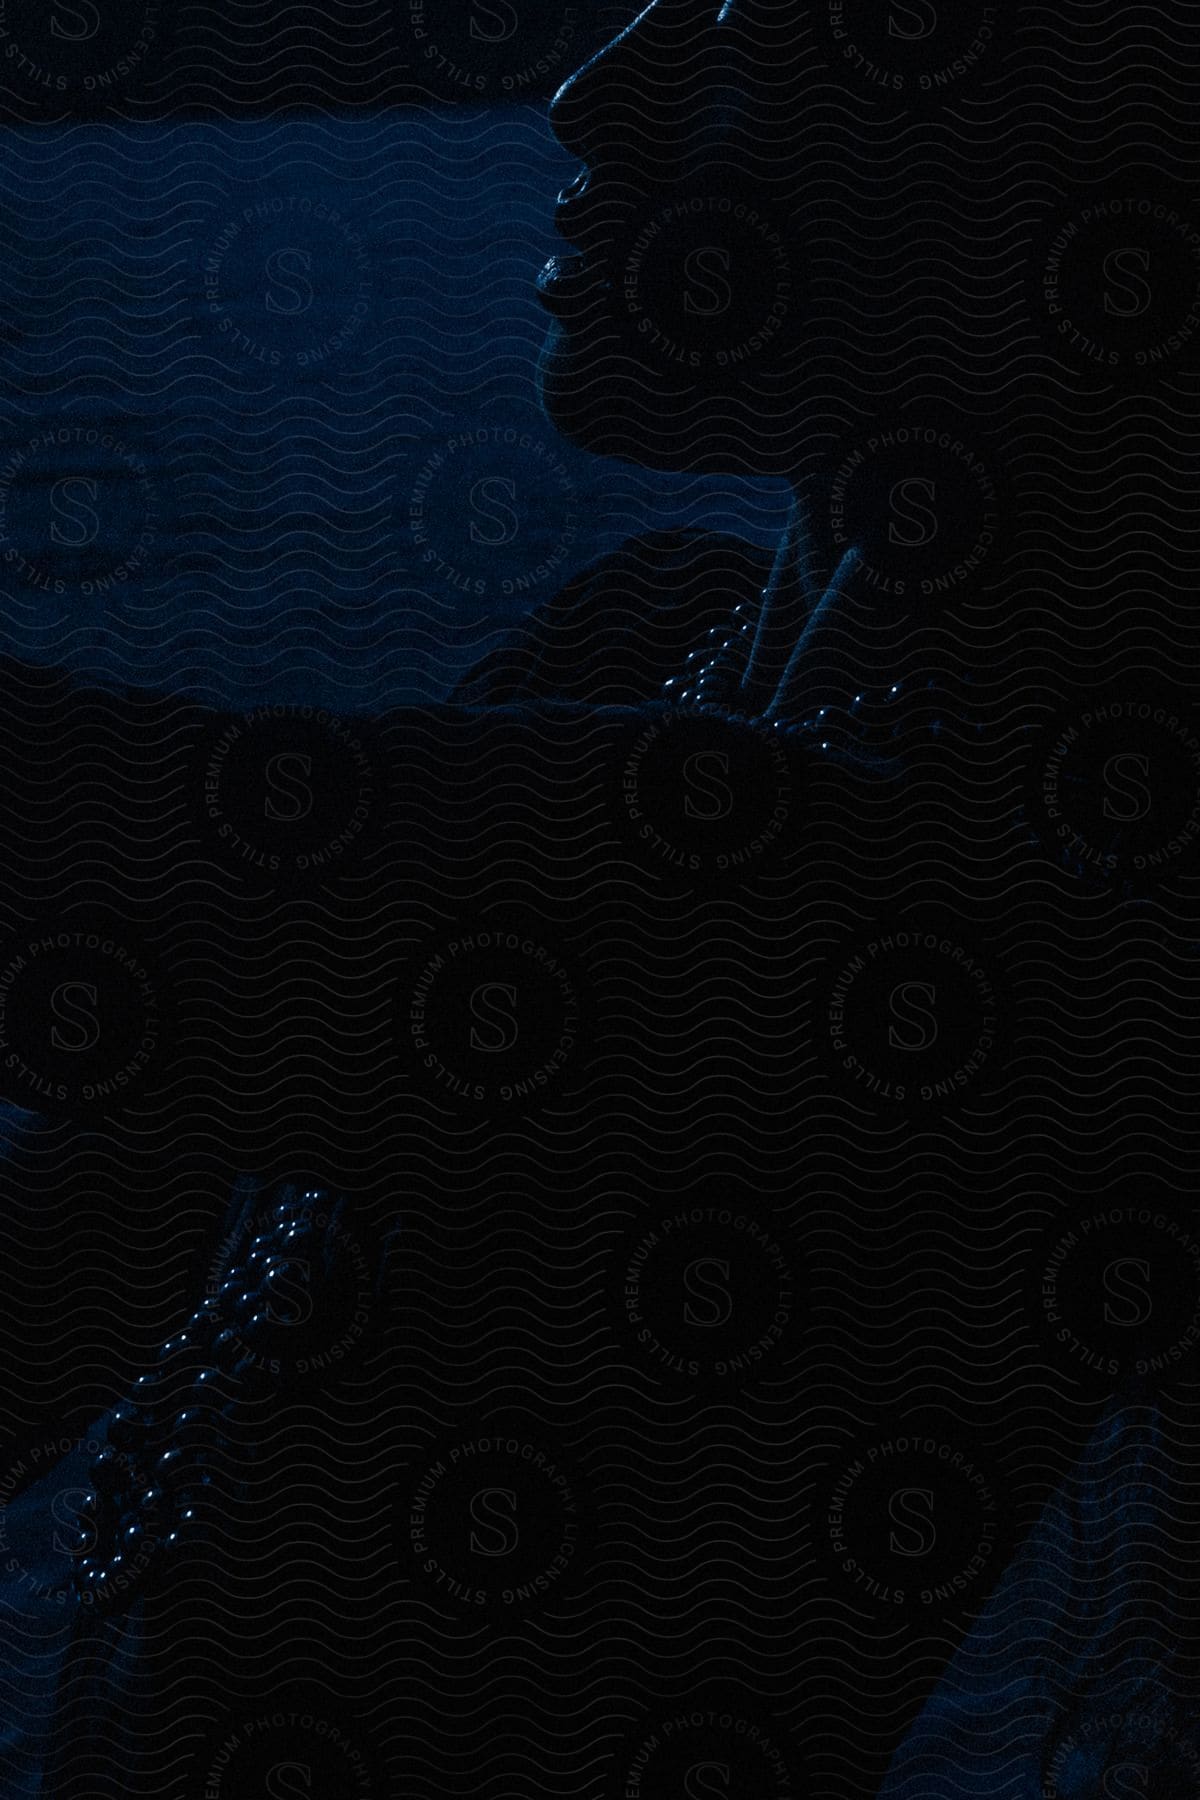 A person in shadows stands near the water at night